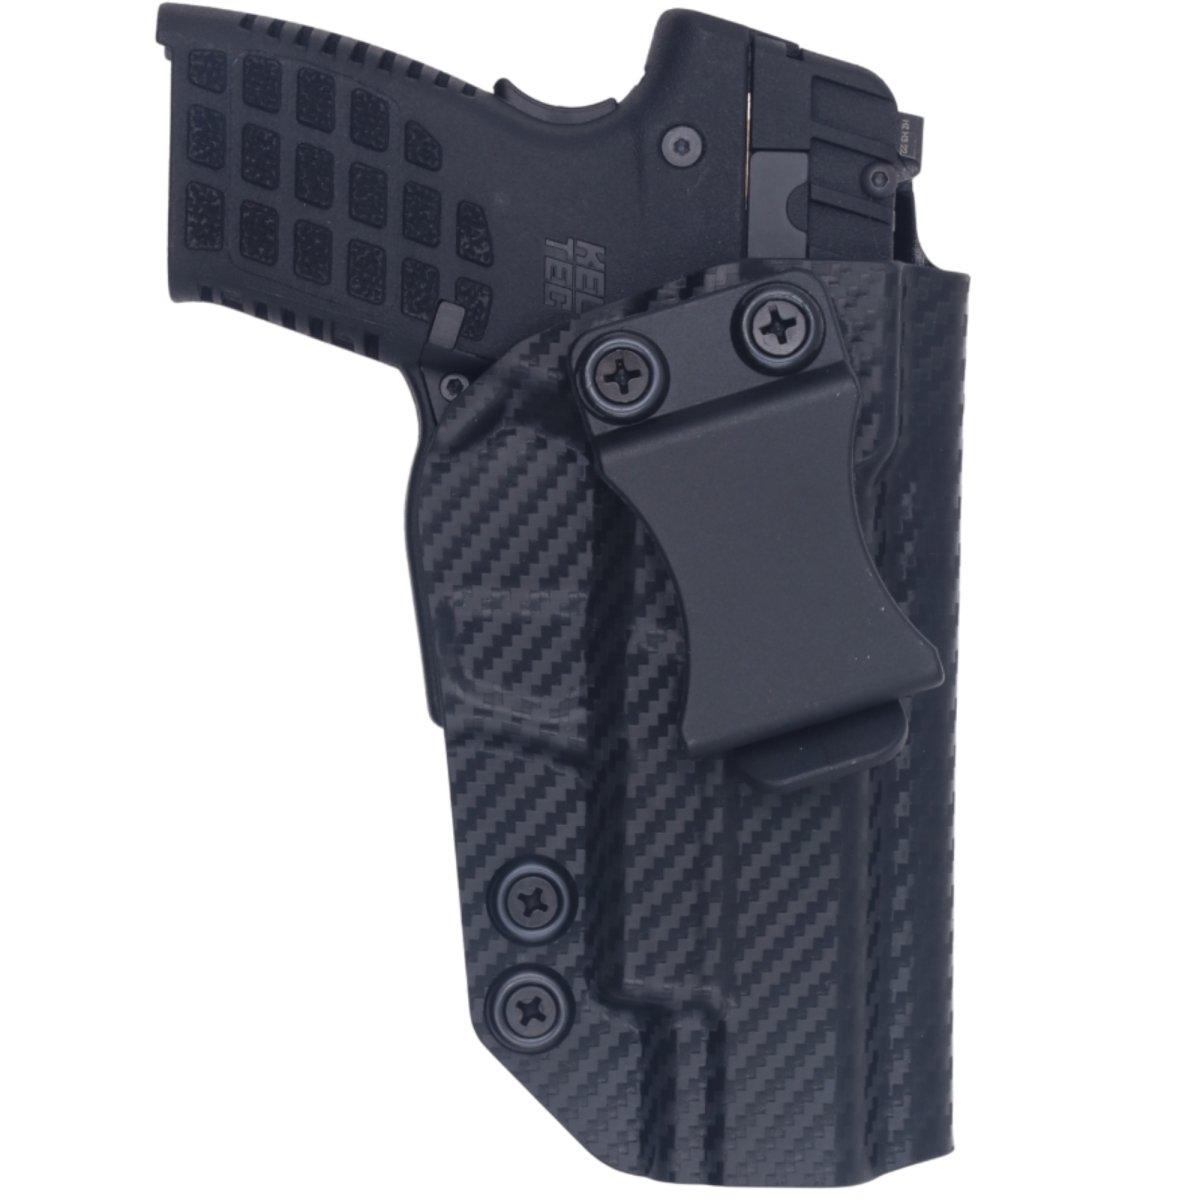 P15 HOLSTERS